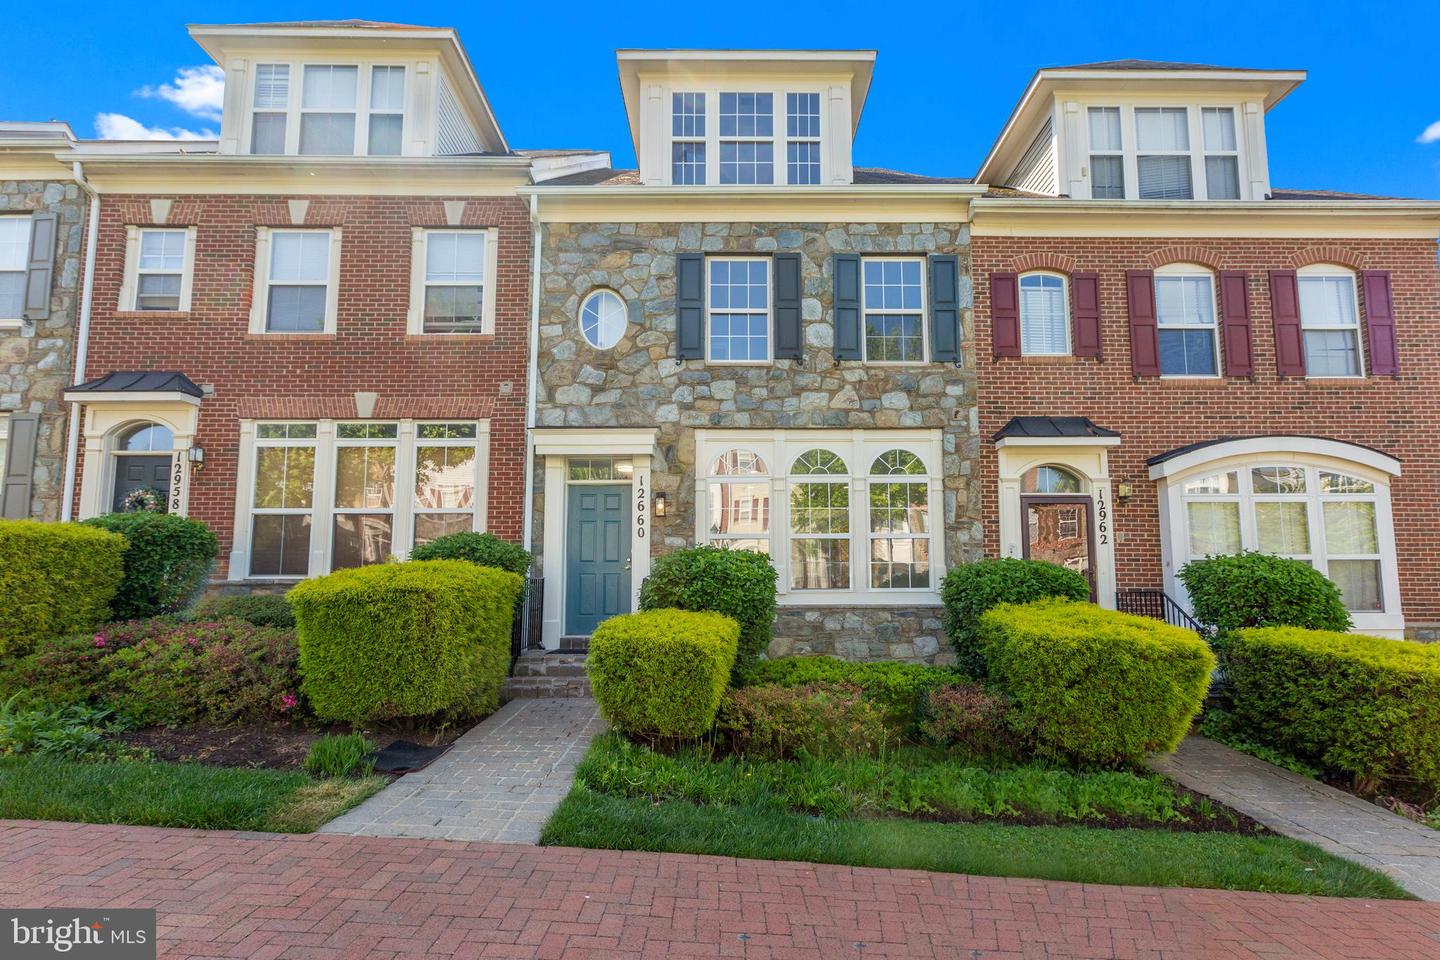 View Clarksburg, MD 20871 townhome